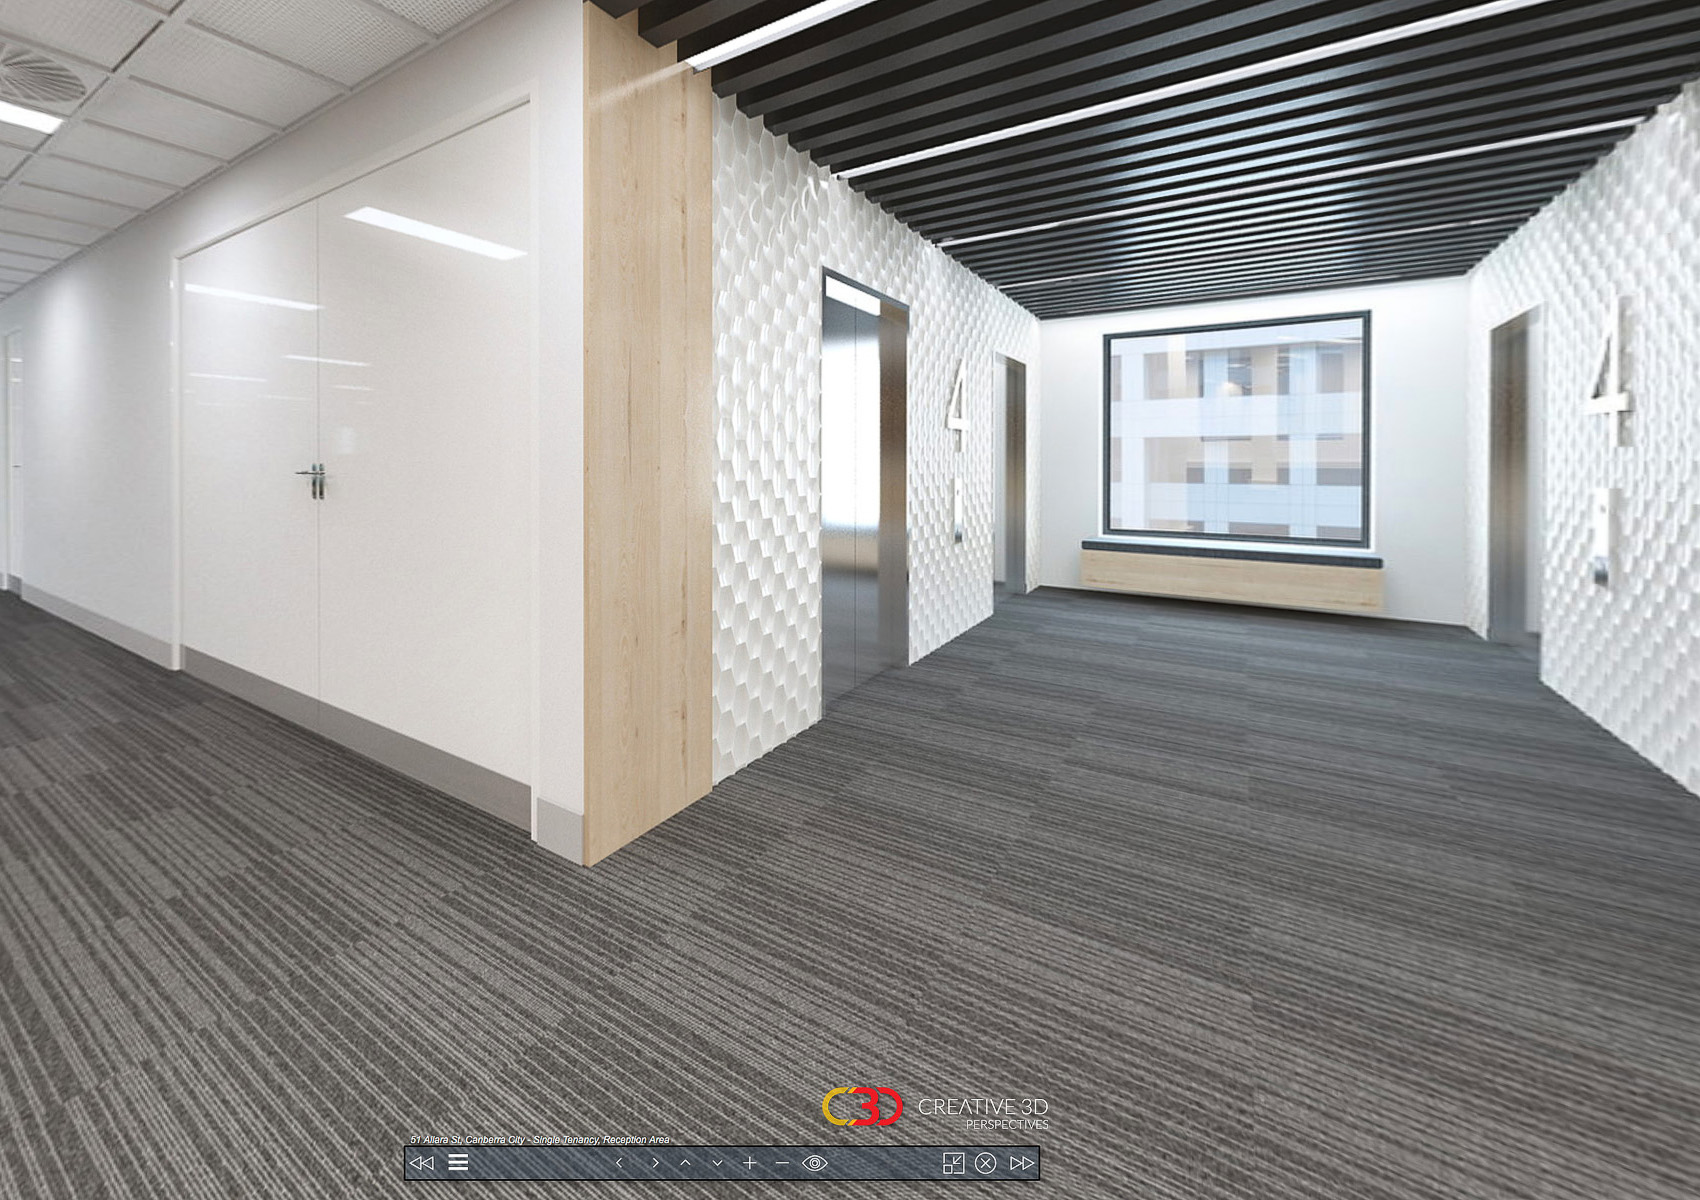 Lifts area of this modern office fitout design, cladding shown on walls, Creative 3D Perspective interior office screenshot from a virtual tour